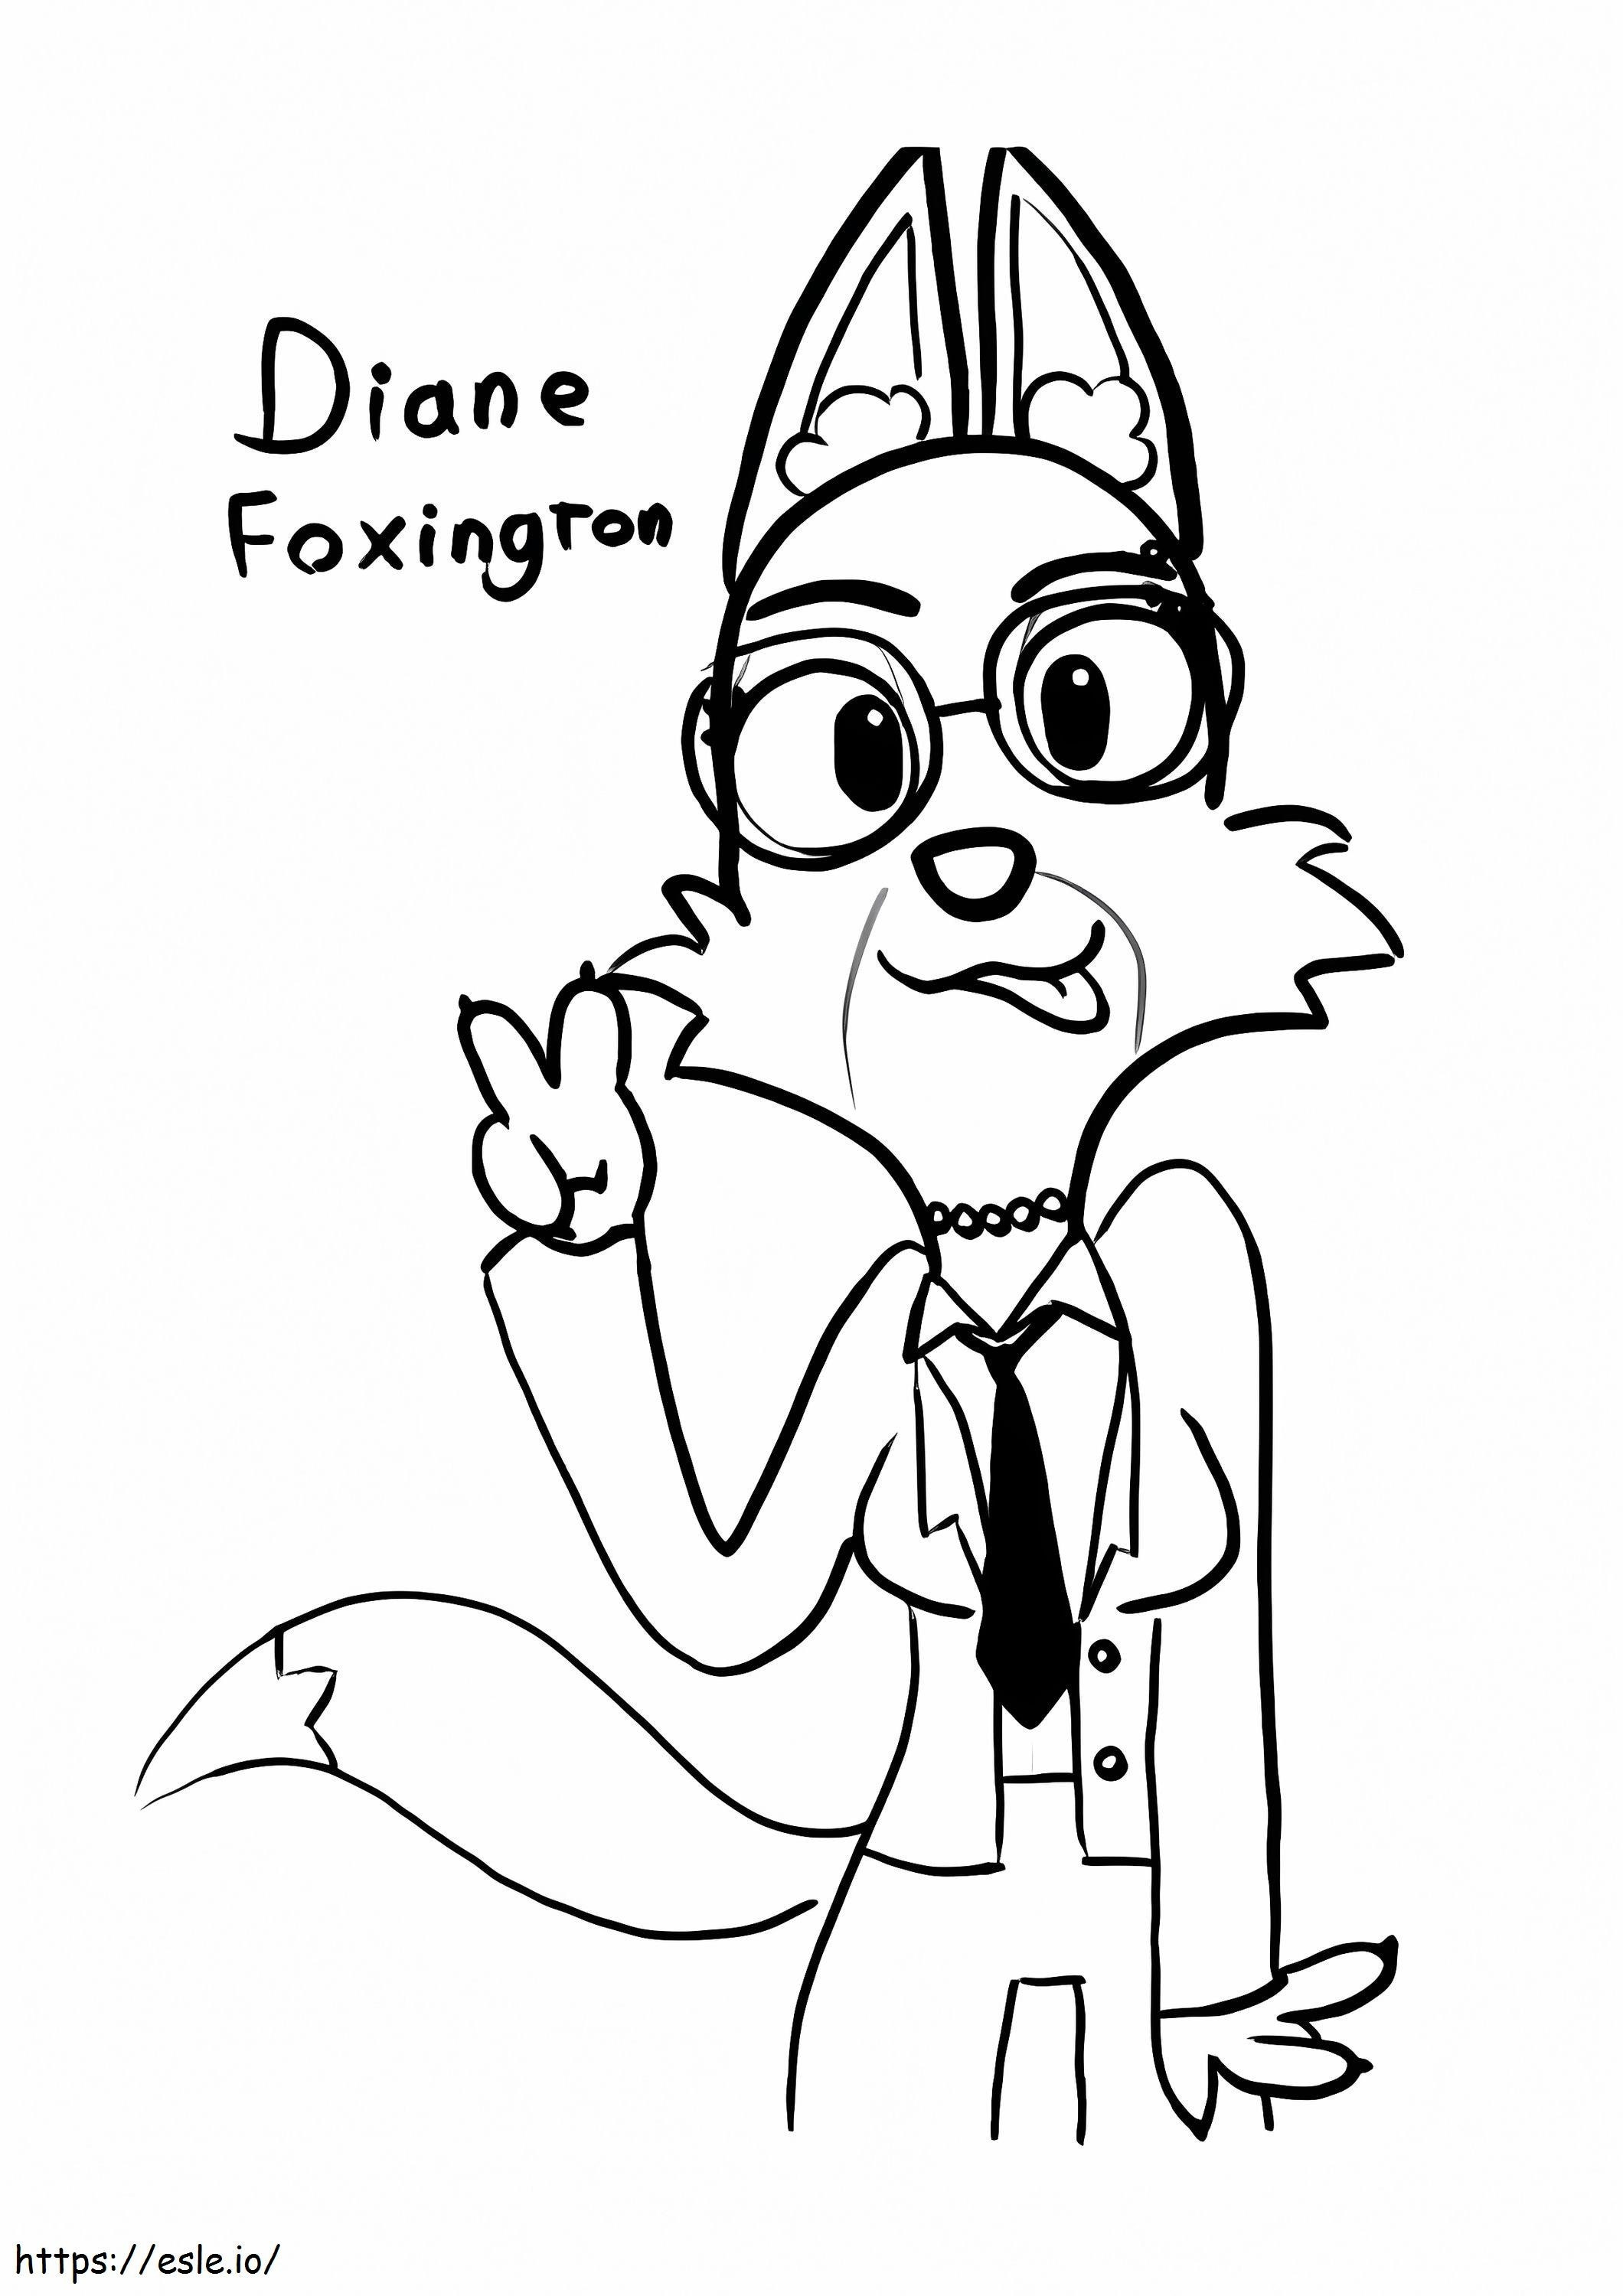 Diane Foxington From The Bad Guys coloring page